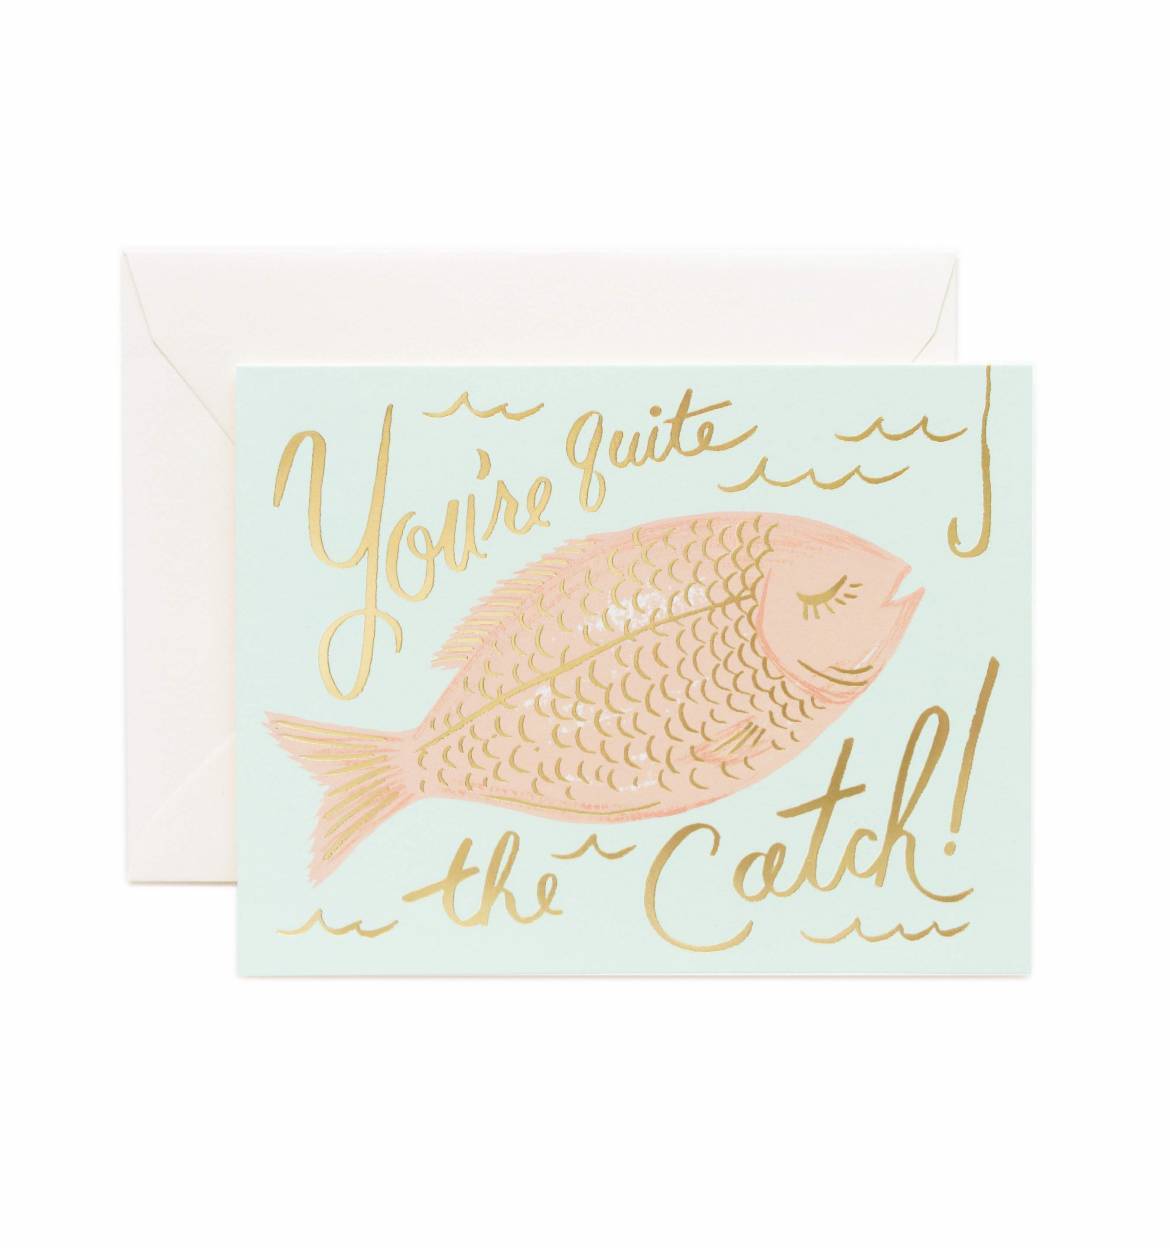 YOU'RE A CATCH GREETING CARD